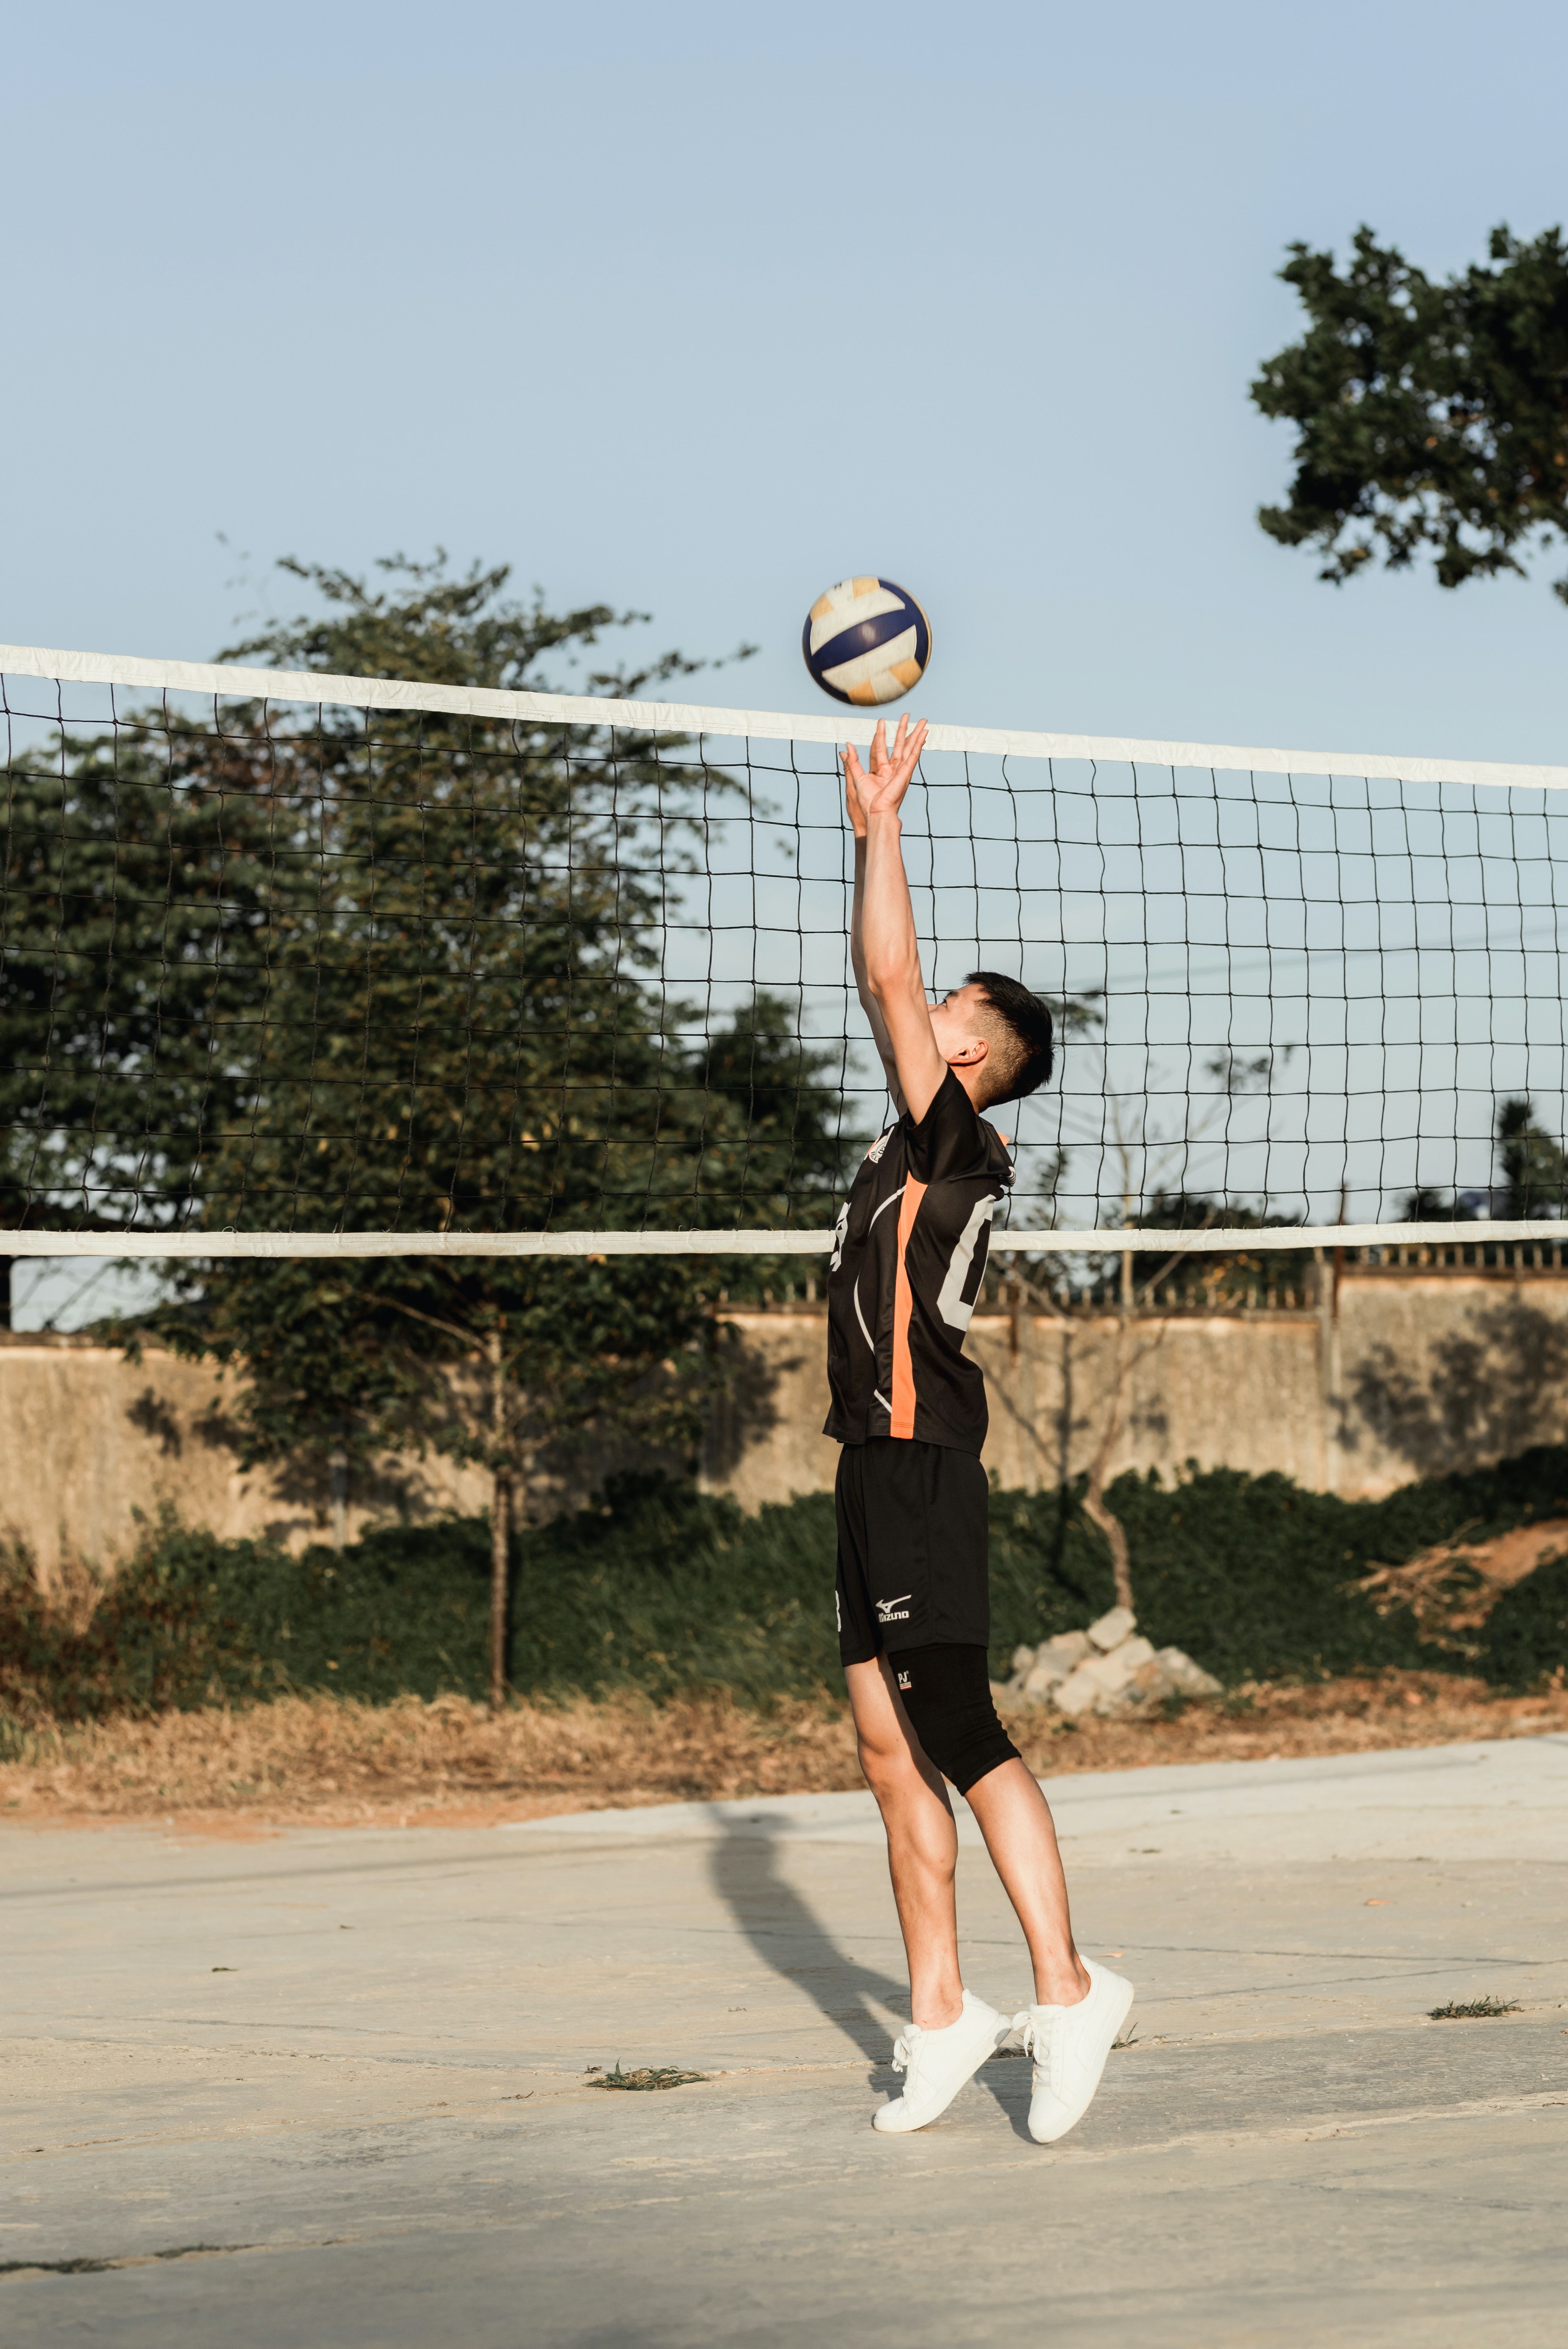 A man in black shirt and shorts playing volleyball - Volleyball